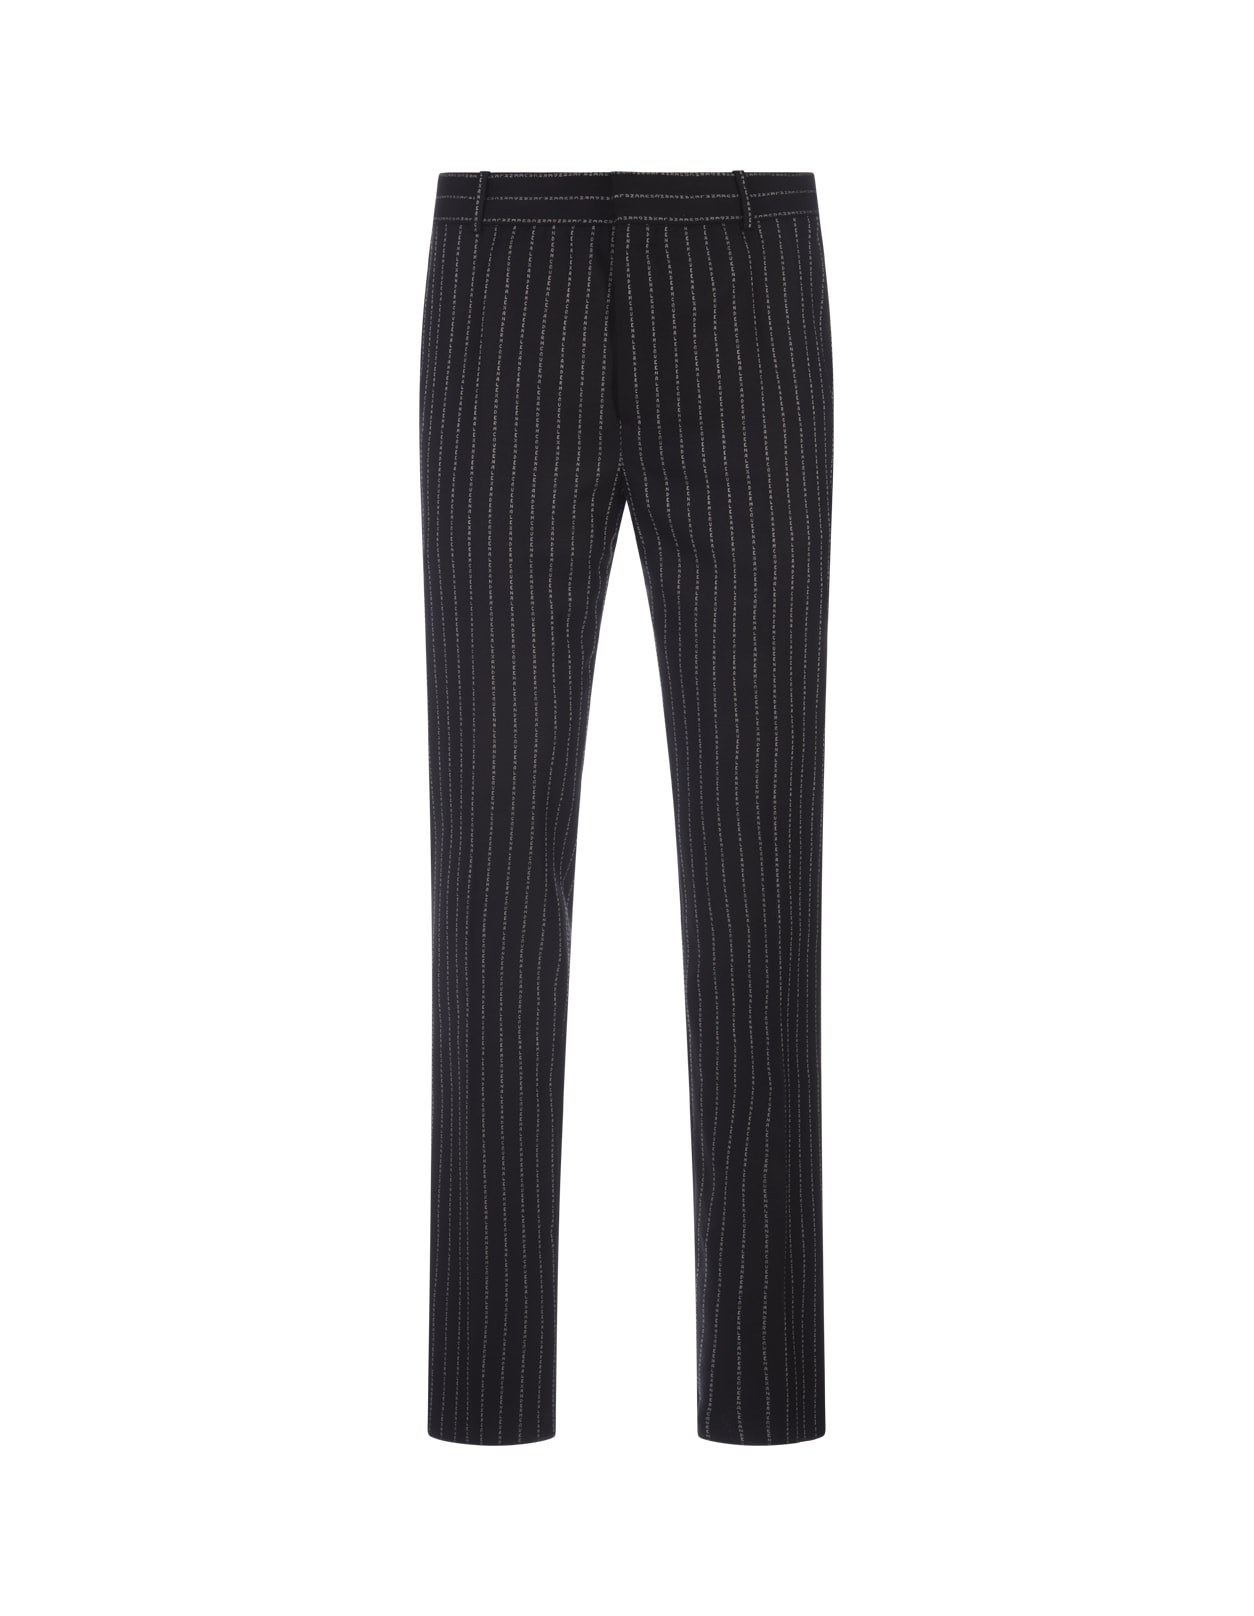 Alexander Mcqueen Black Pinstripe Trousers With Lettering Logo